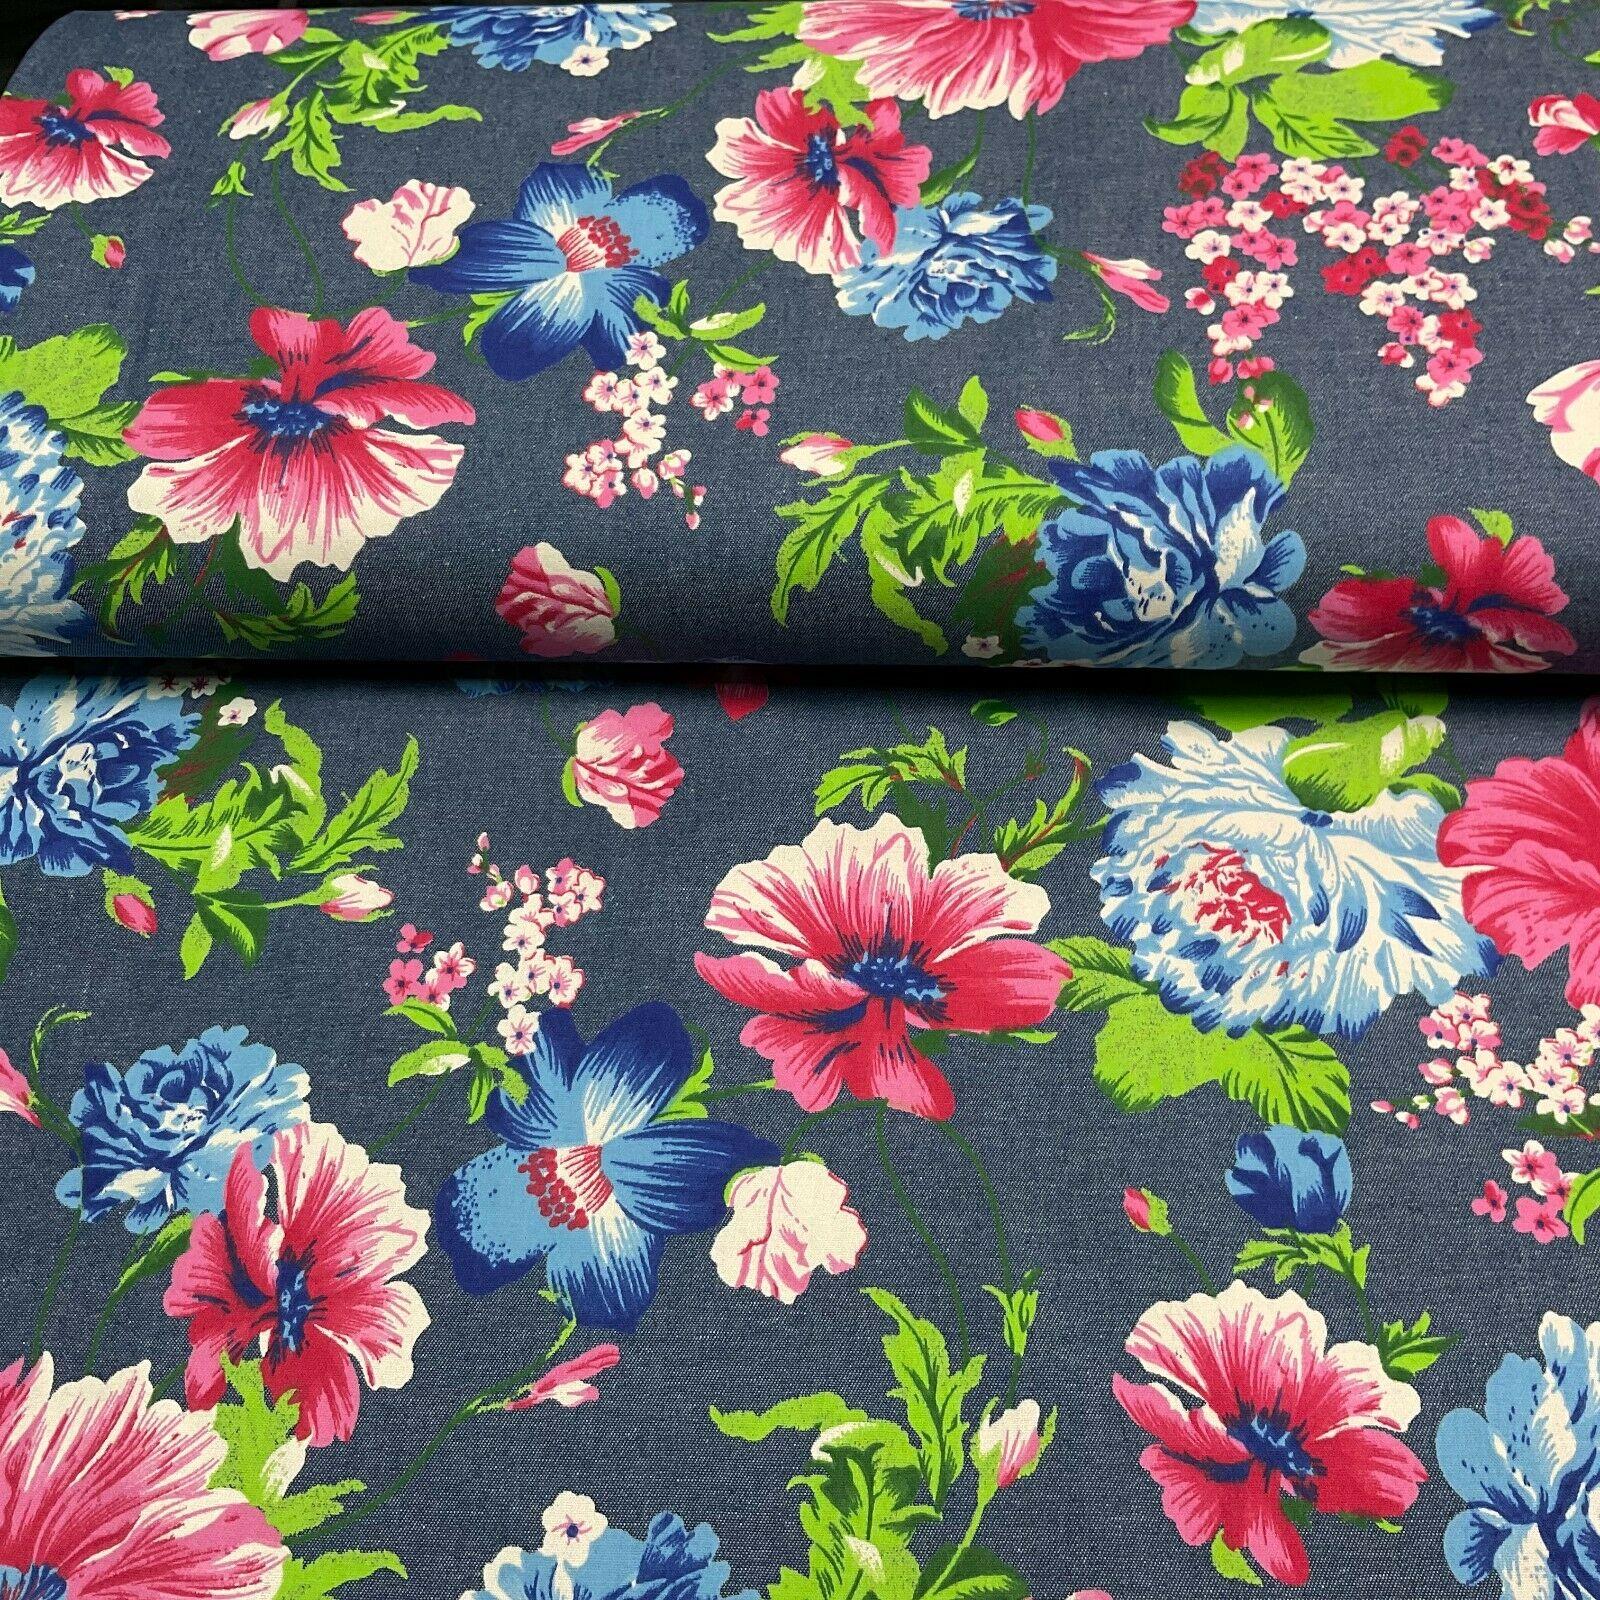 Print Cotton Fabric Designer Fabric Floral Printed Patterned 